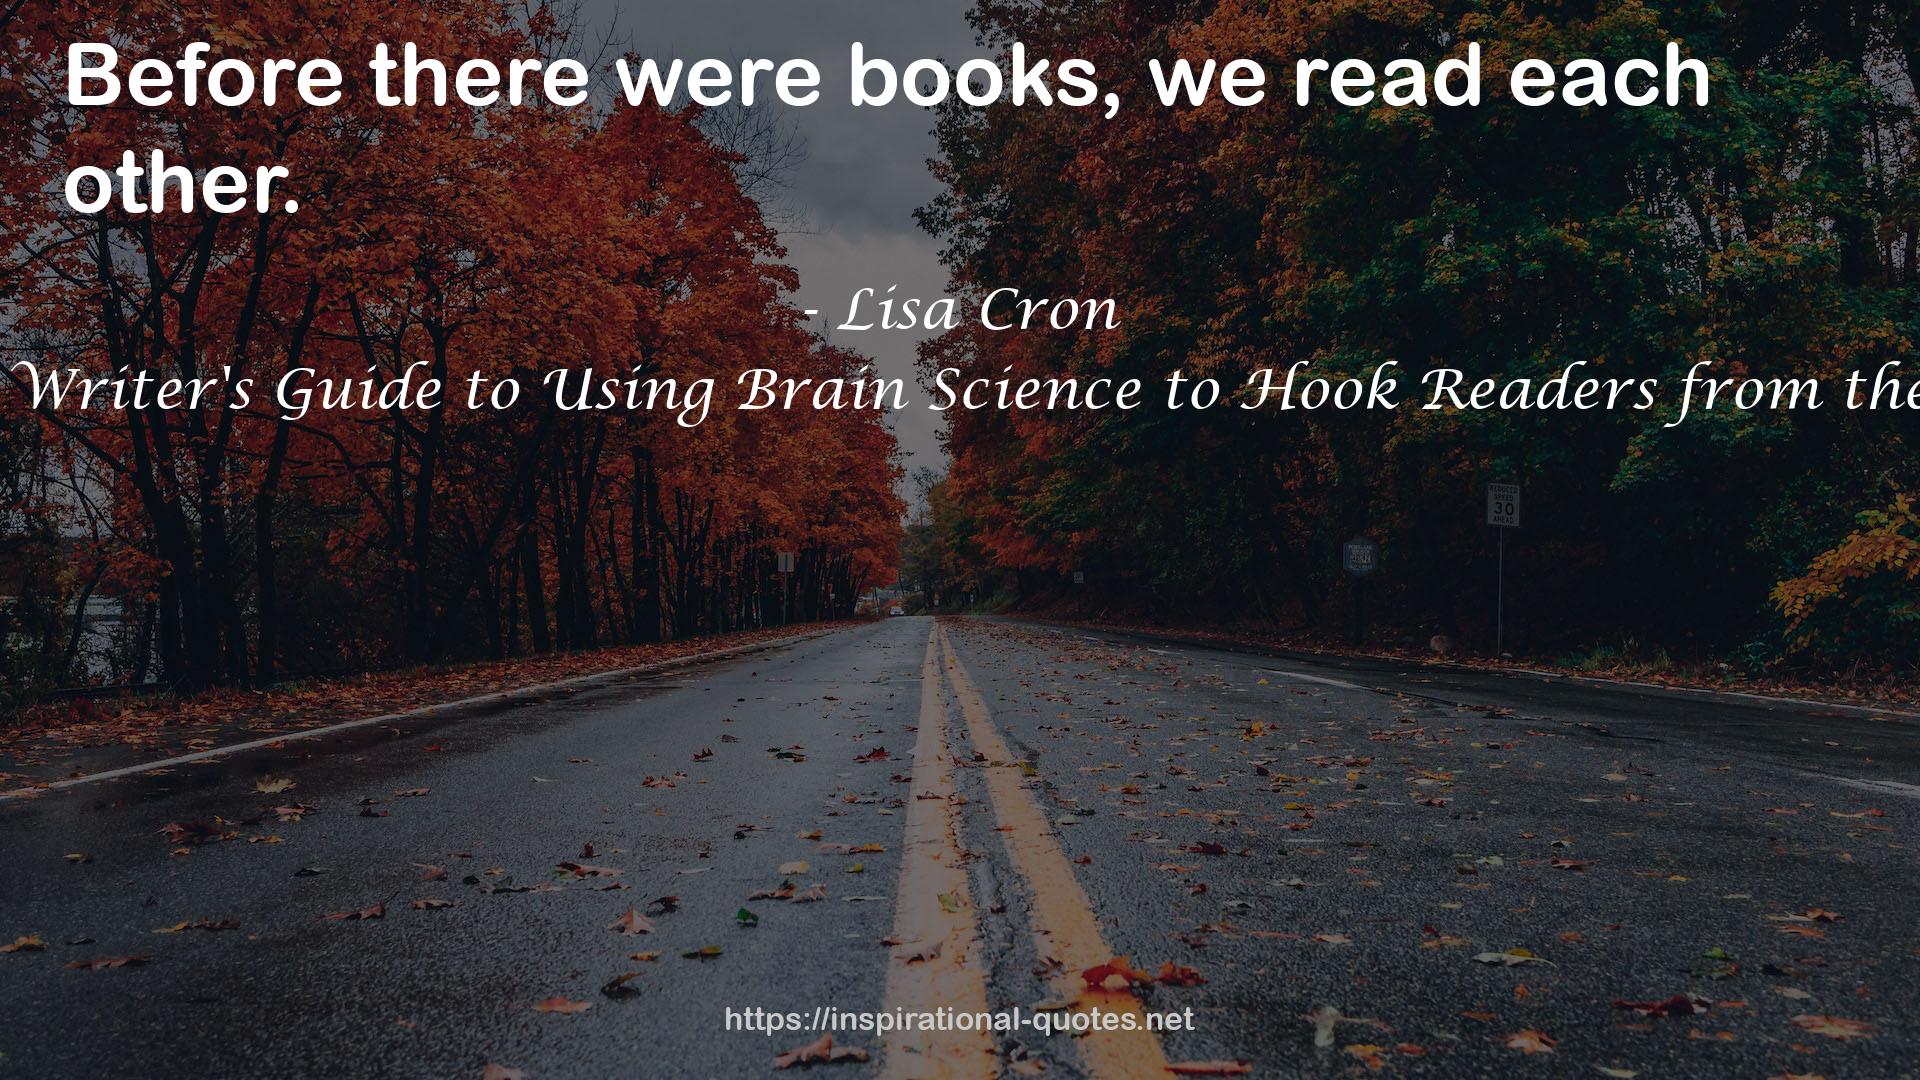 Wired for Story: The Writer's Guide to Using Brain Science to Hook Readers from the Very First Sentence QUOTES